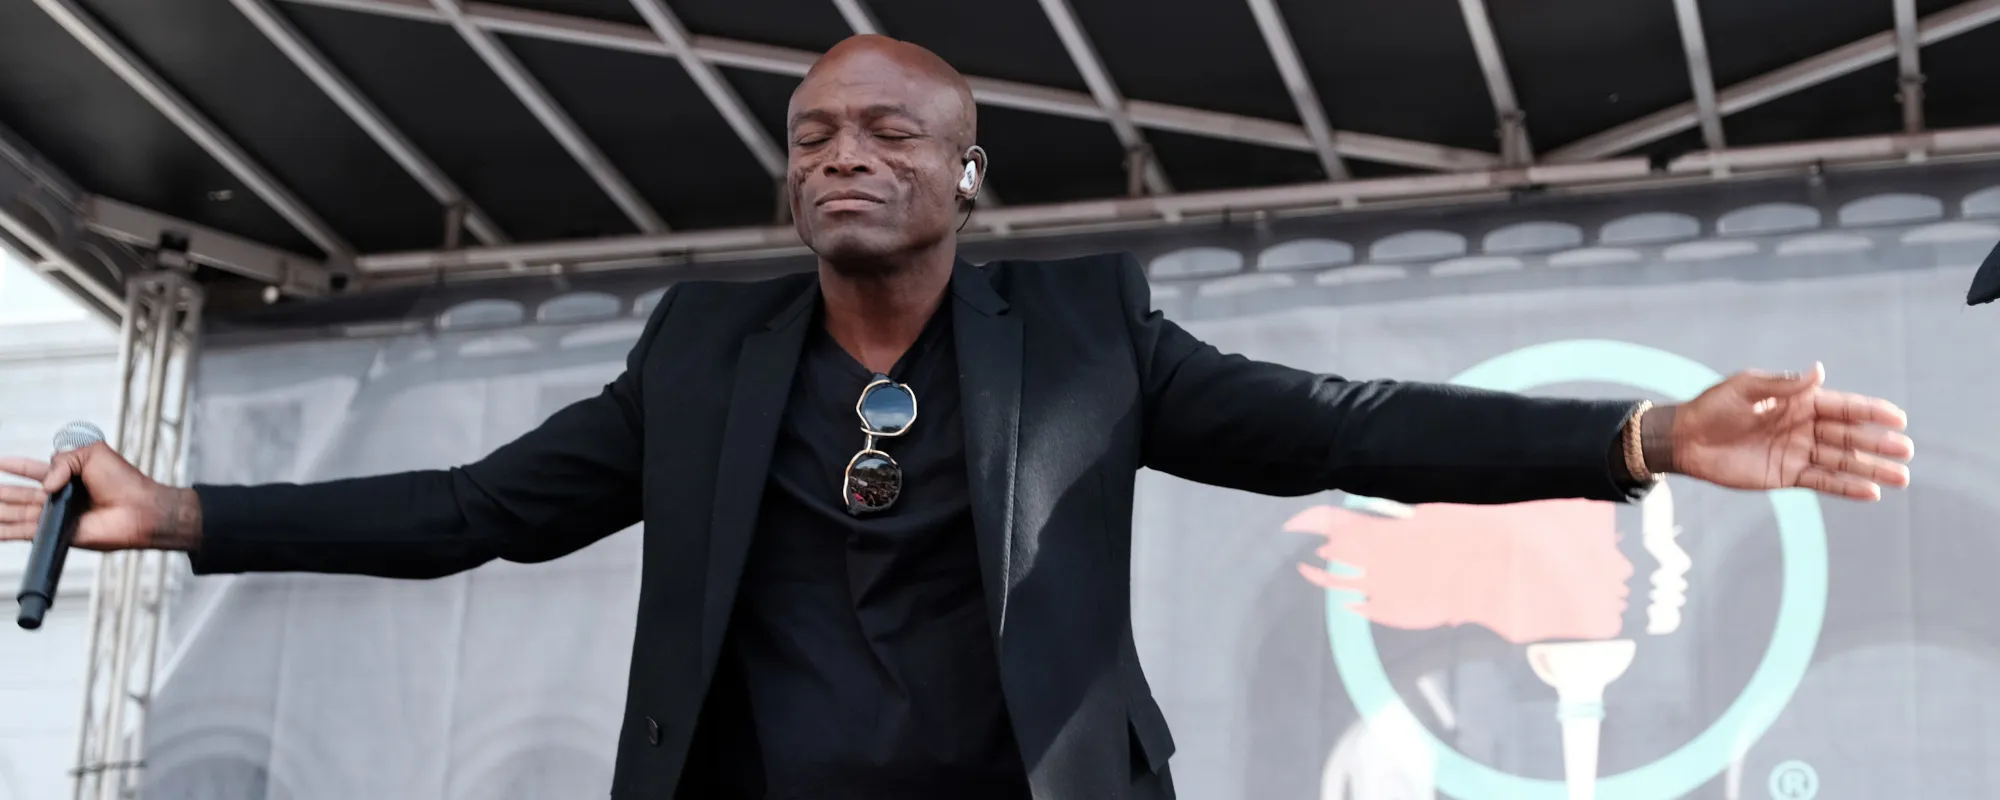 How a Painfully Changing World Inspired the Meaning Behind Seal’s “Crazy”